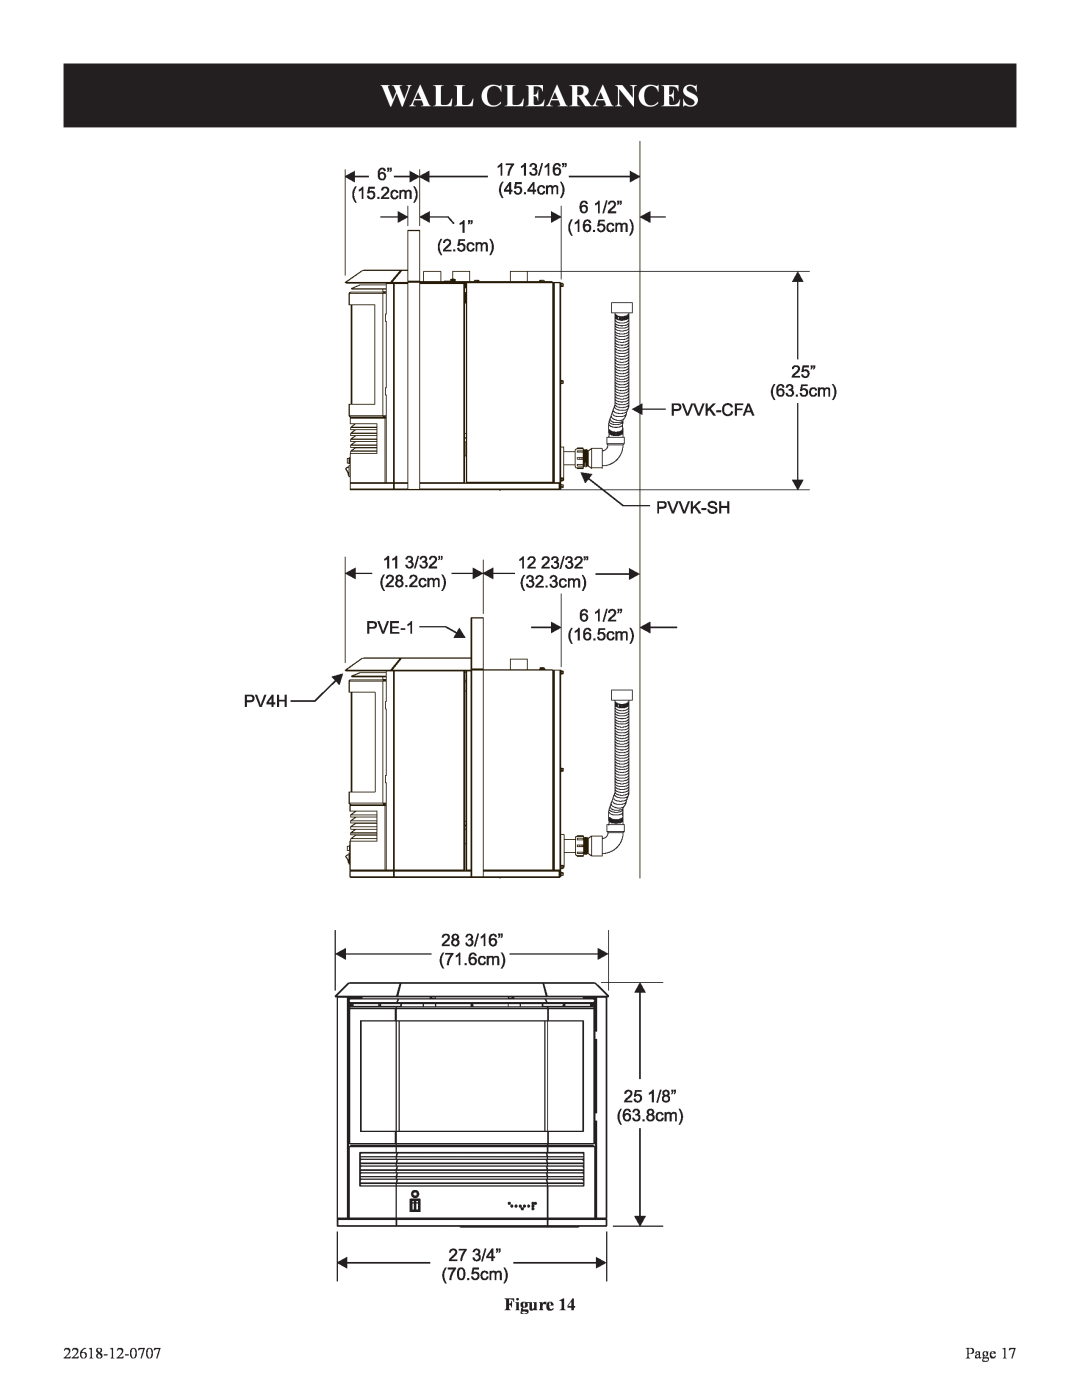 Elitegroup PV-28SV55-(CN,CP,GN,GP)-1, PV-28SV50-(BN,BP)-1 installation instructions Wall Clearances, 22618-12-0707, Page 